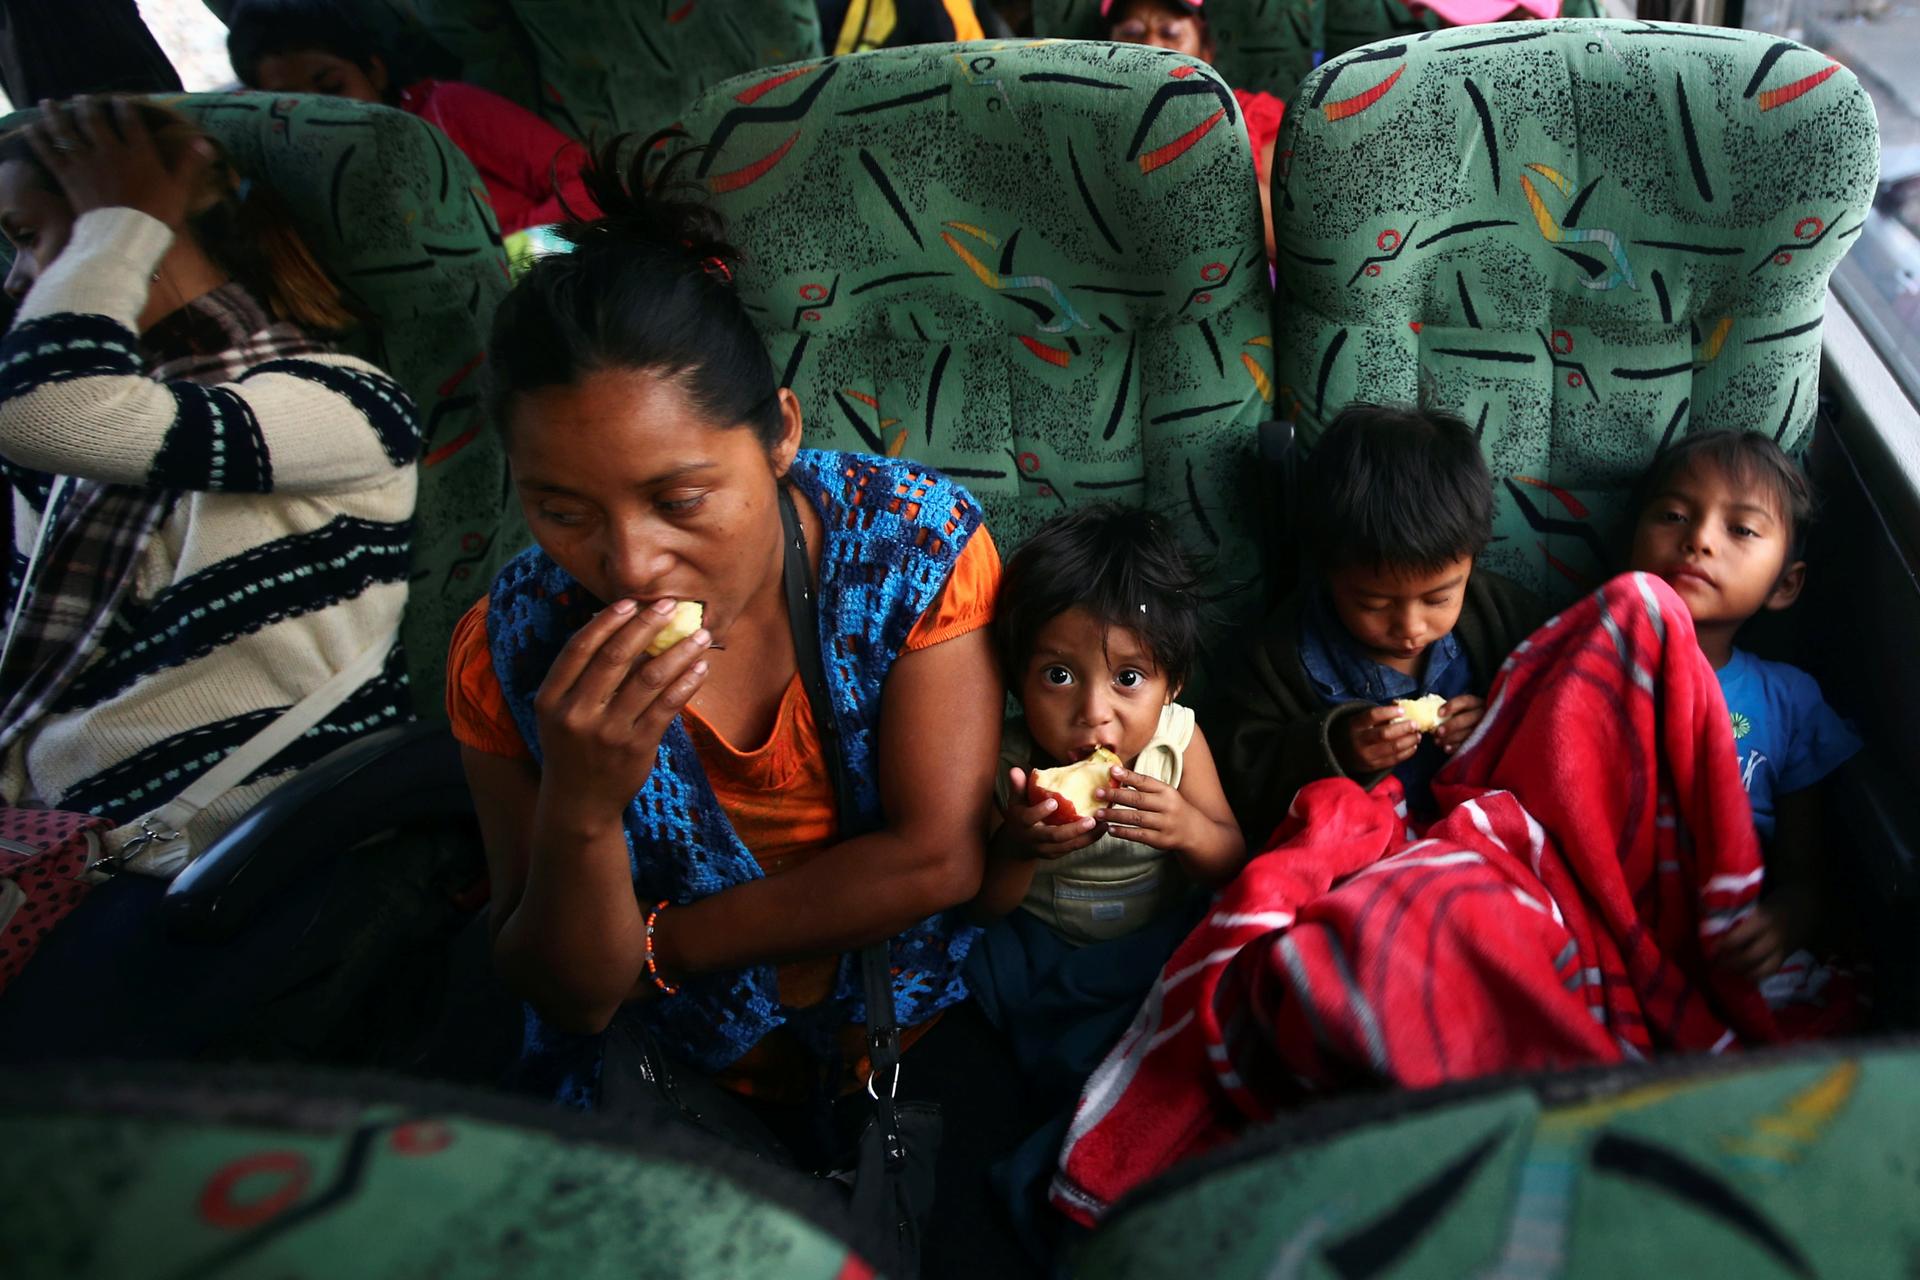 Central American migrants moving in a caravan on a bus through Mexico are seen eating.